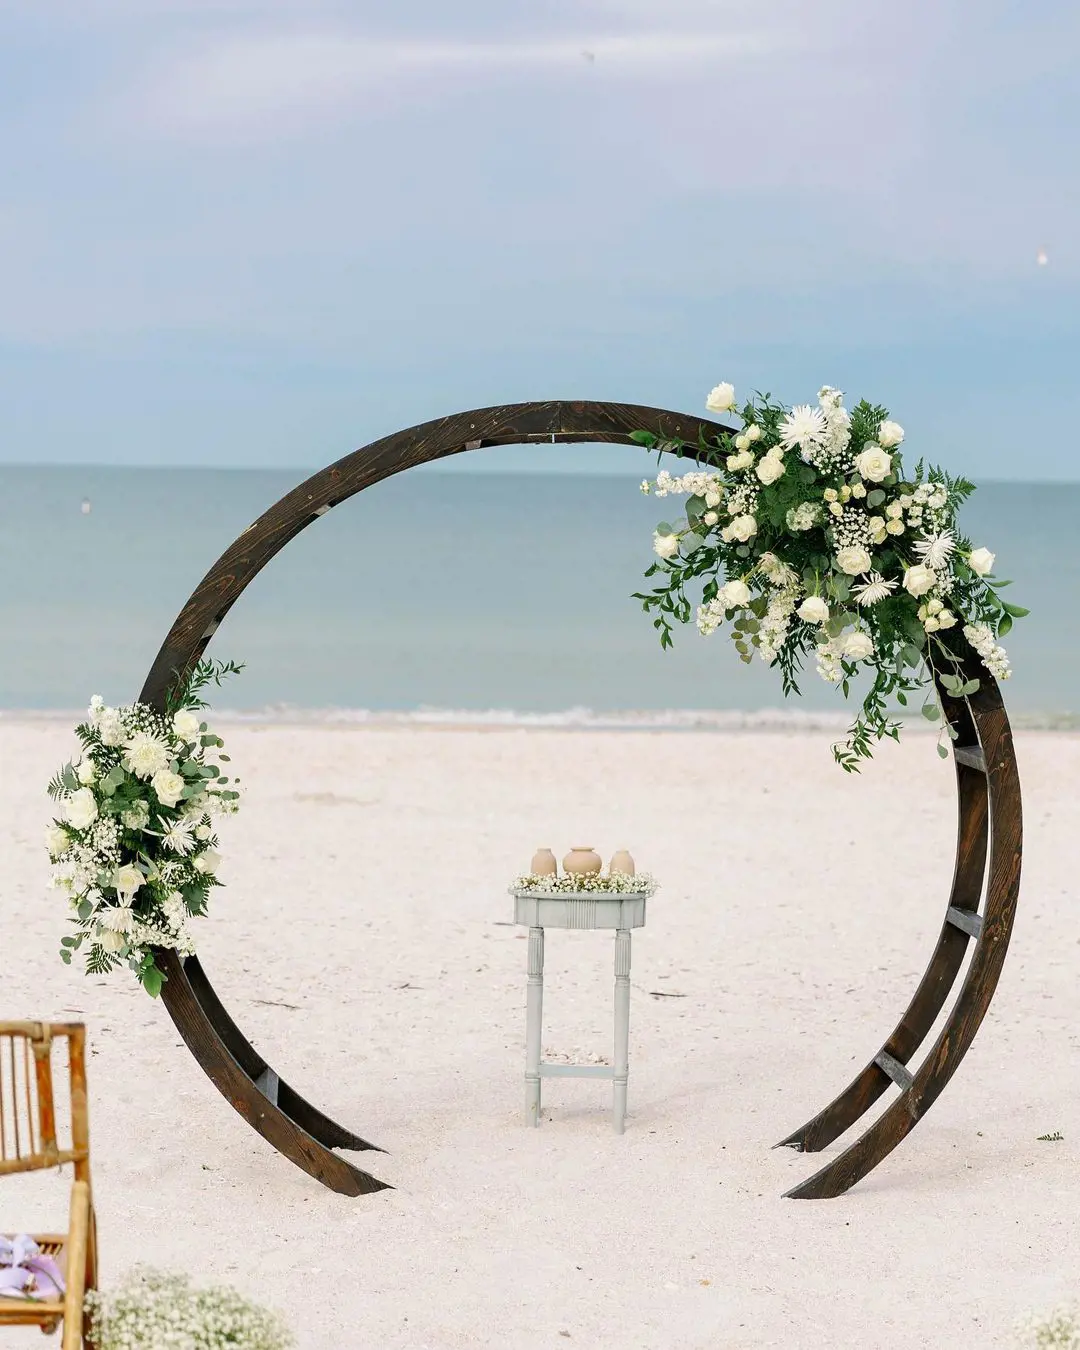 Florida is one of the best place to get married with a beach front views